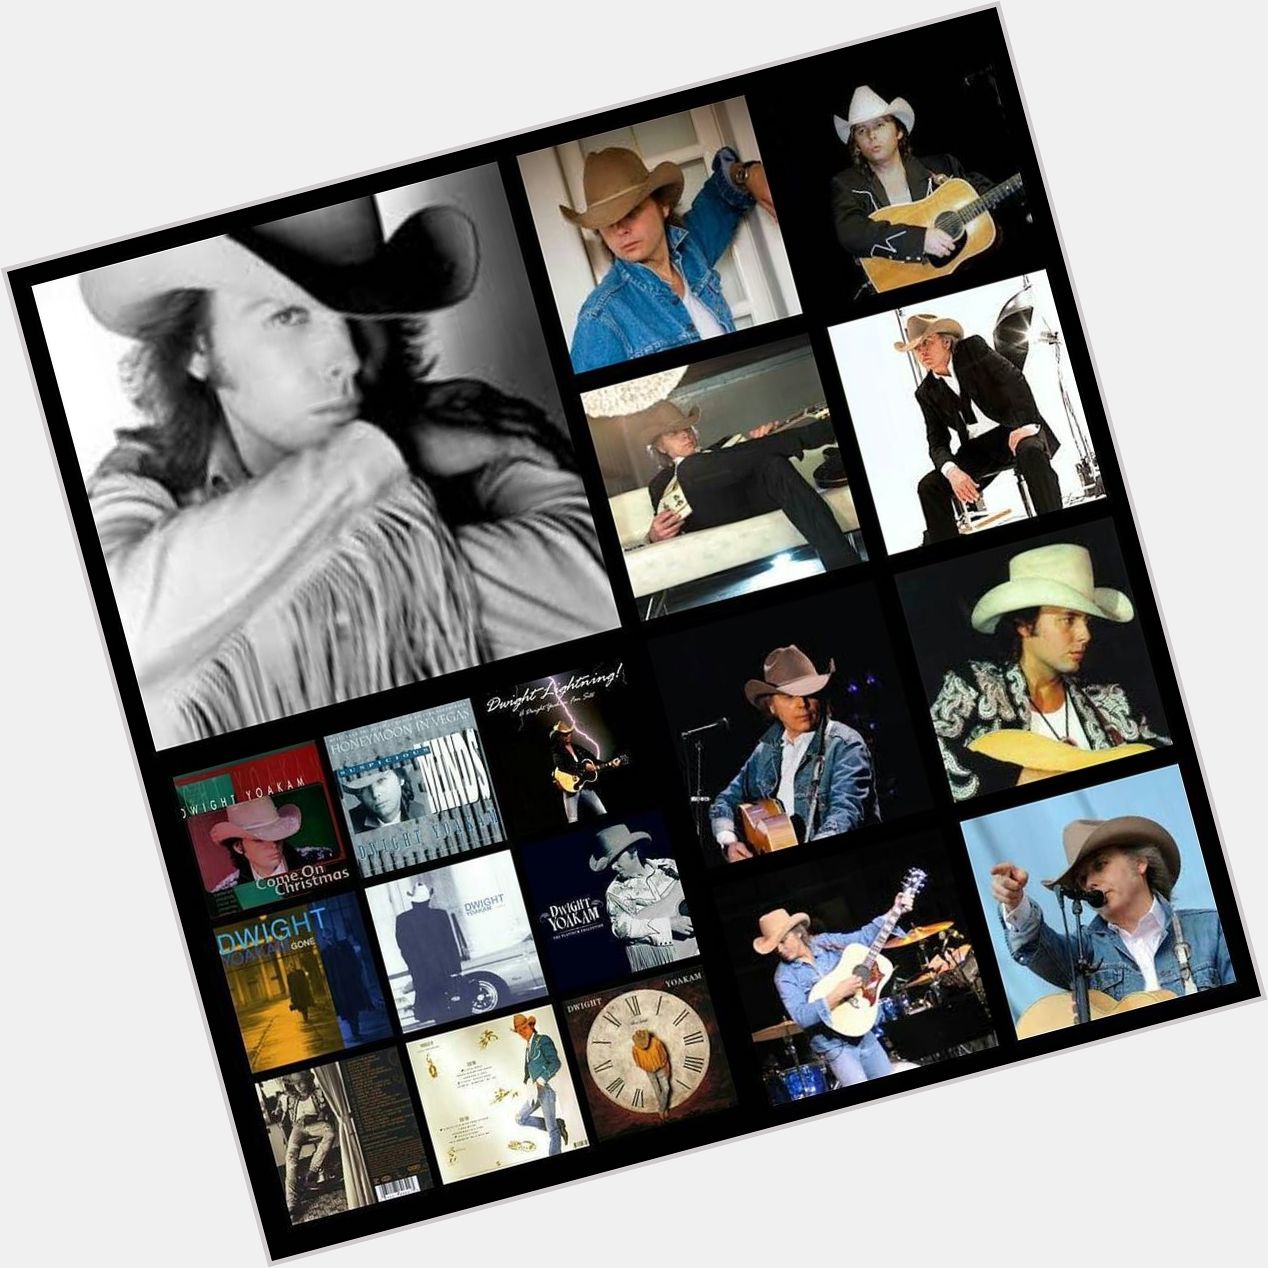  :  | Happy Birthday Wishes Today To Country Singer - Songwriter Dwight Yoakam wh 